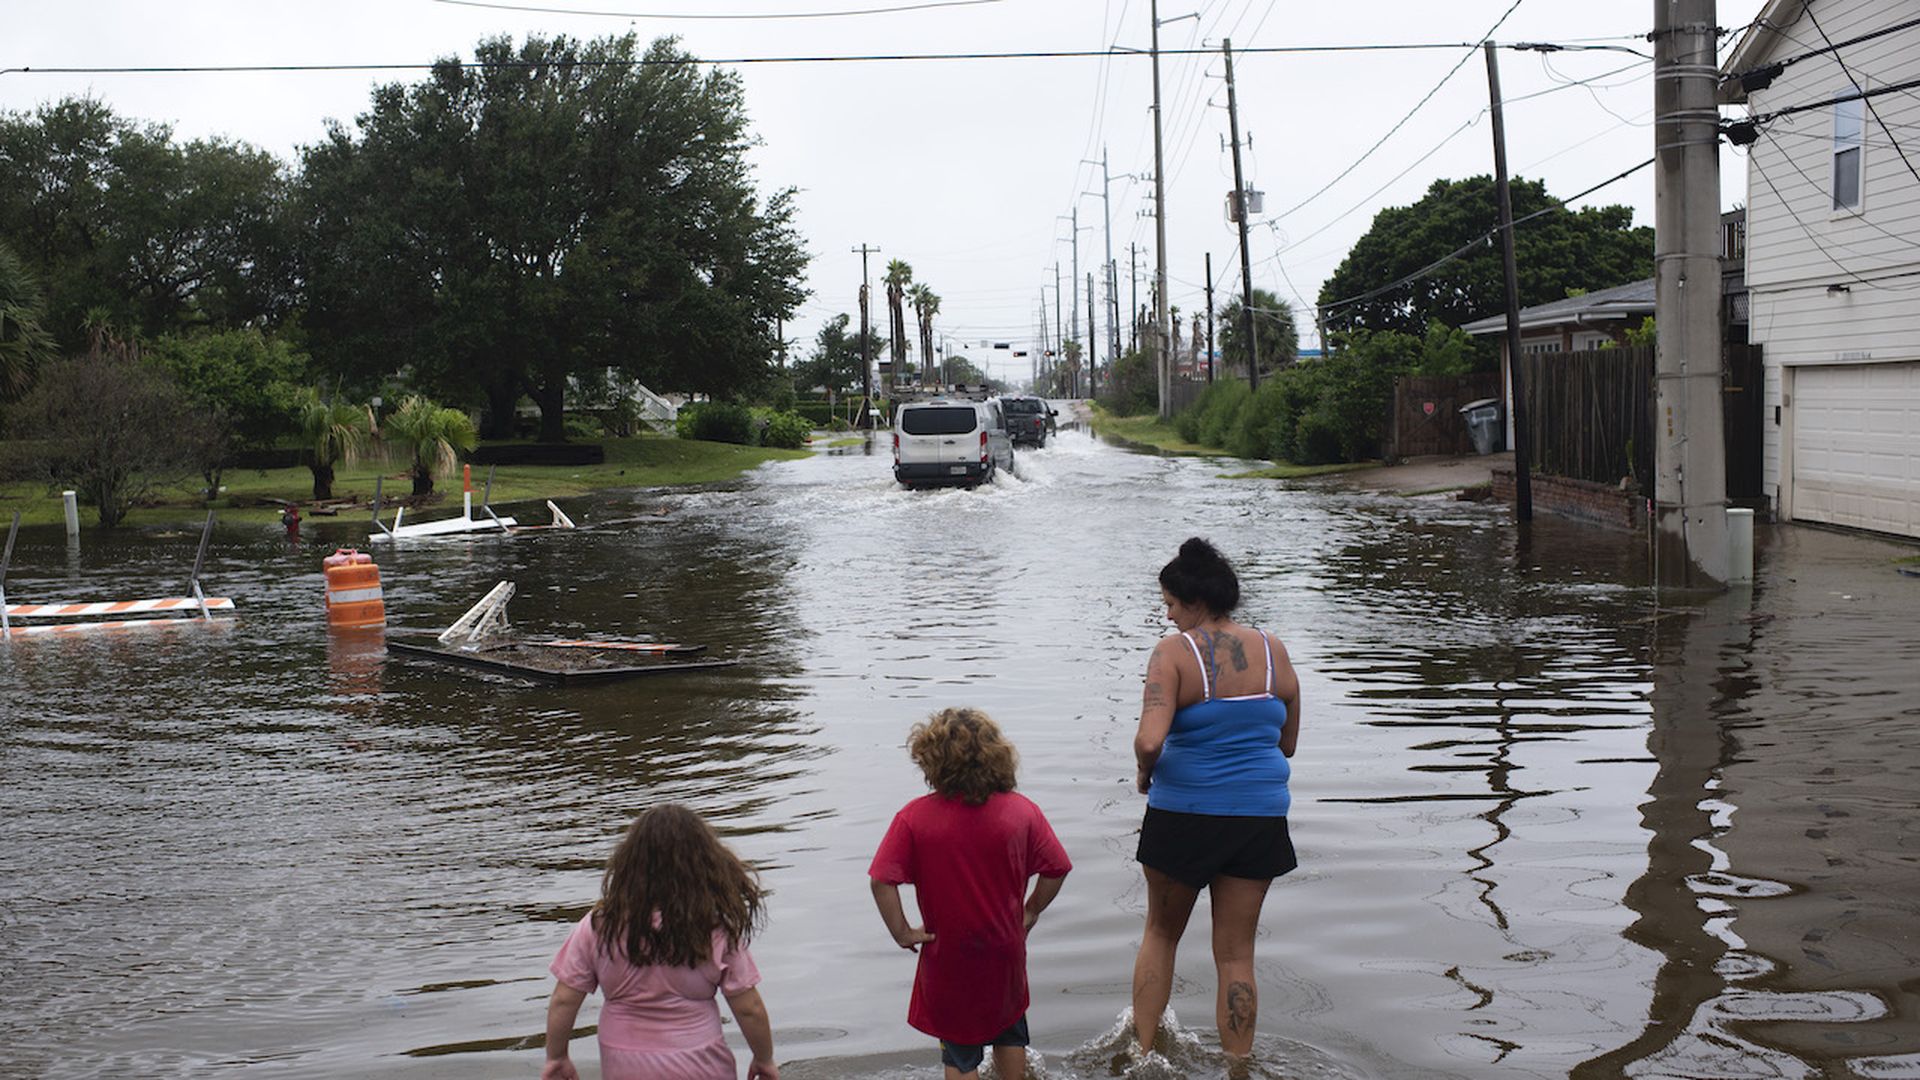 Family wading through flood waters after Hurricane Nicholas landed in Galveston, Texas on September 14, 2021